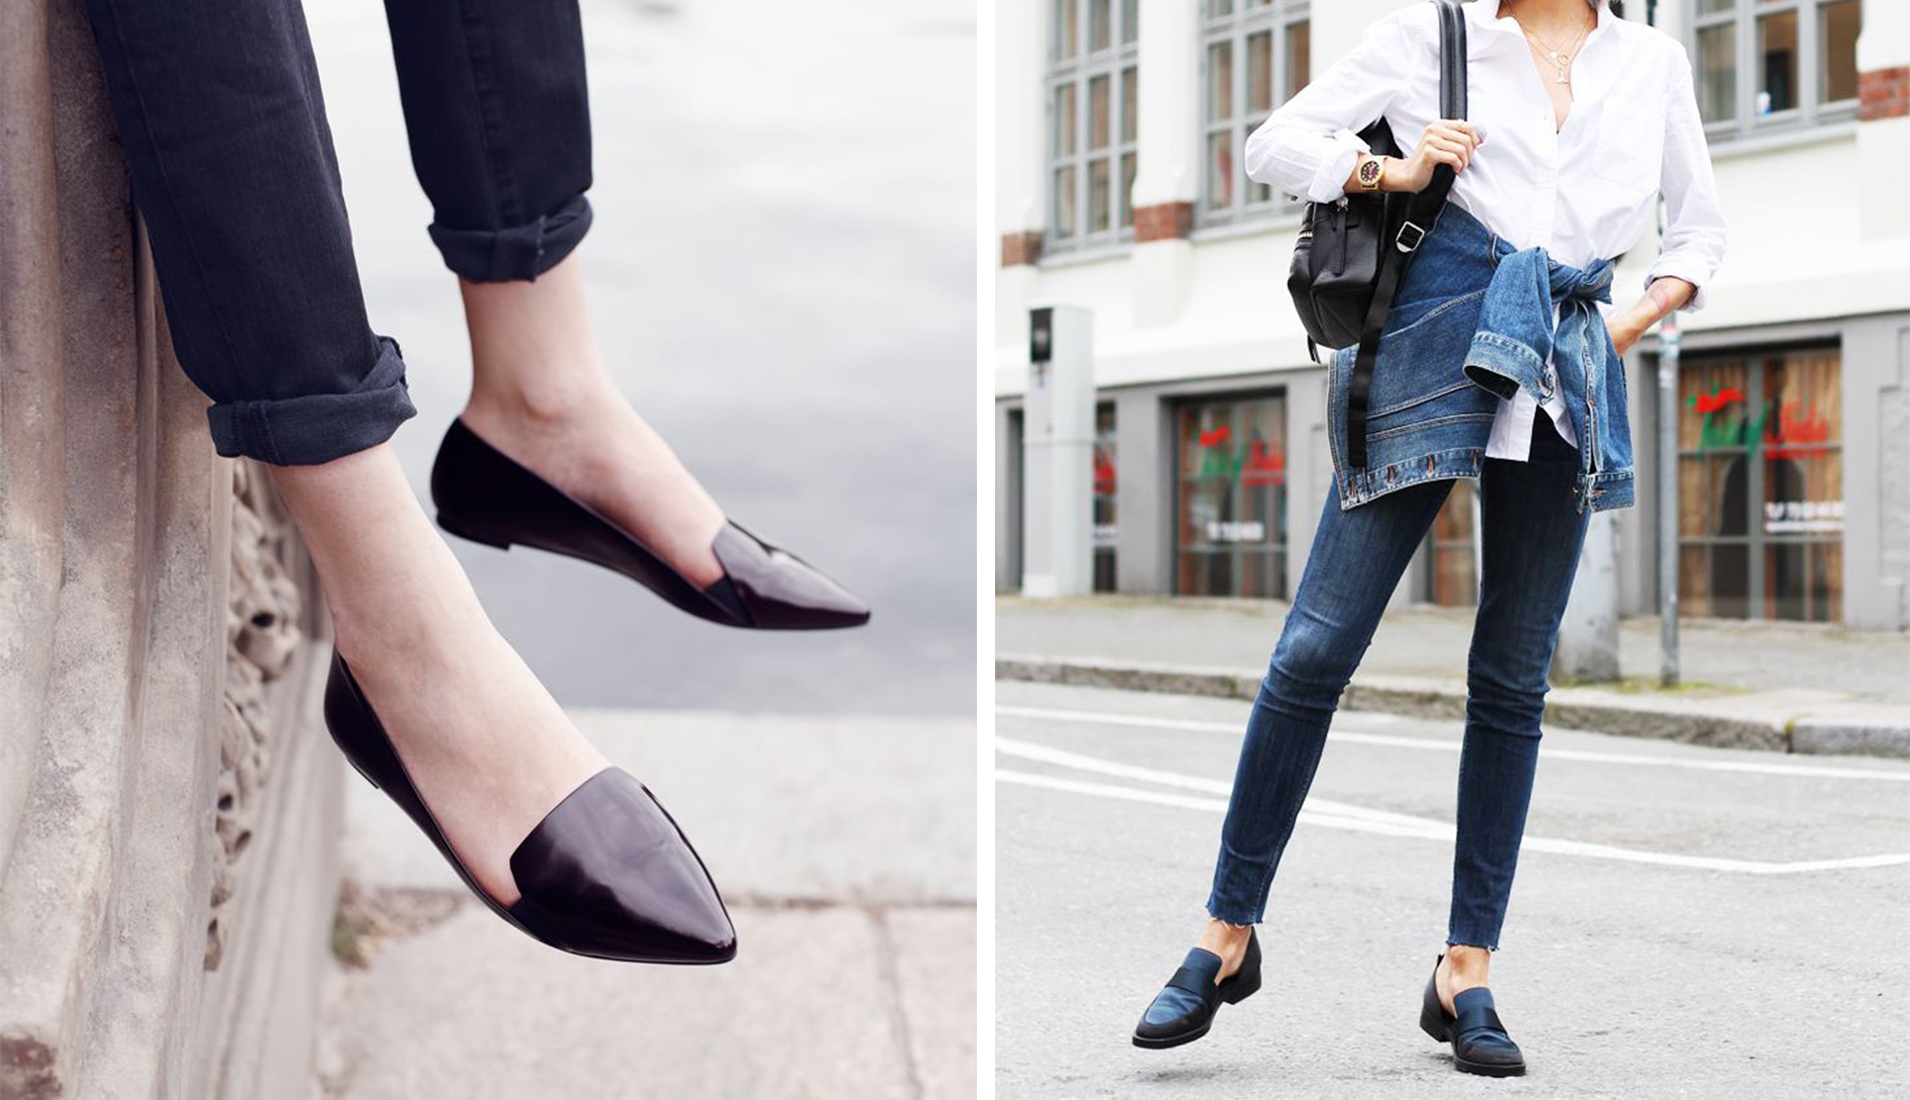 15 Pairs of Loafers You'll Love — The Fox & She